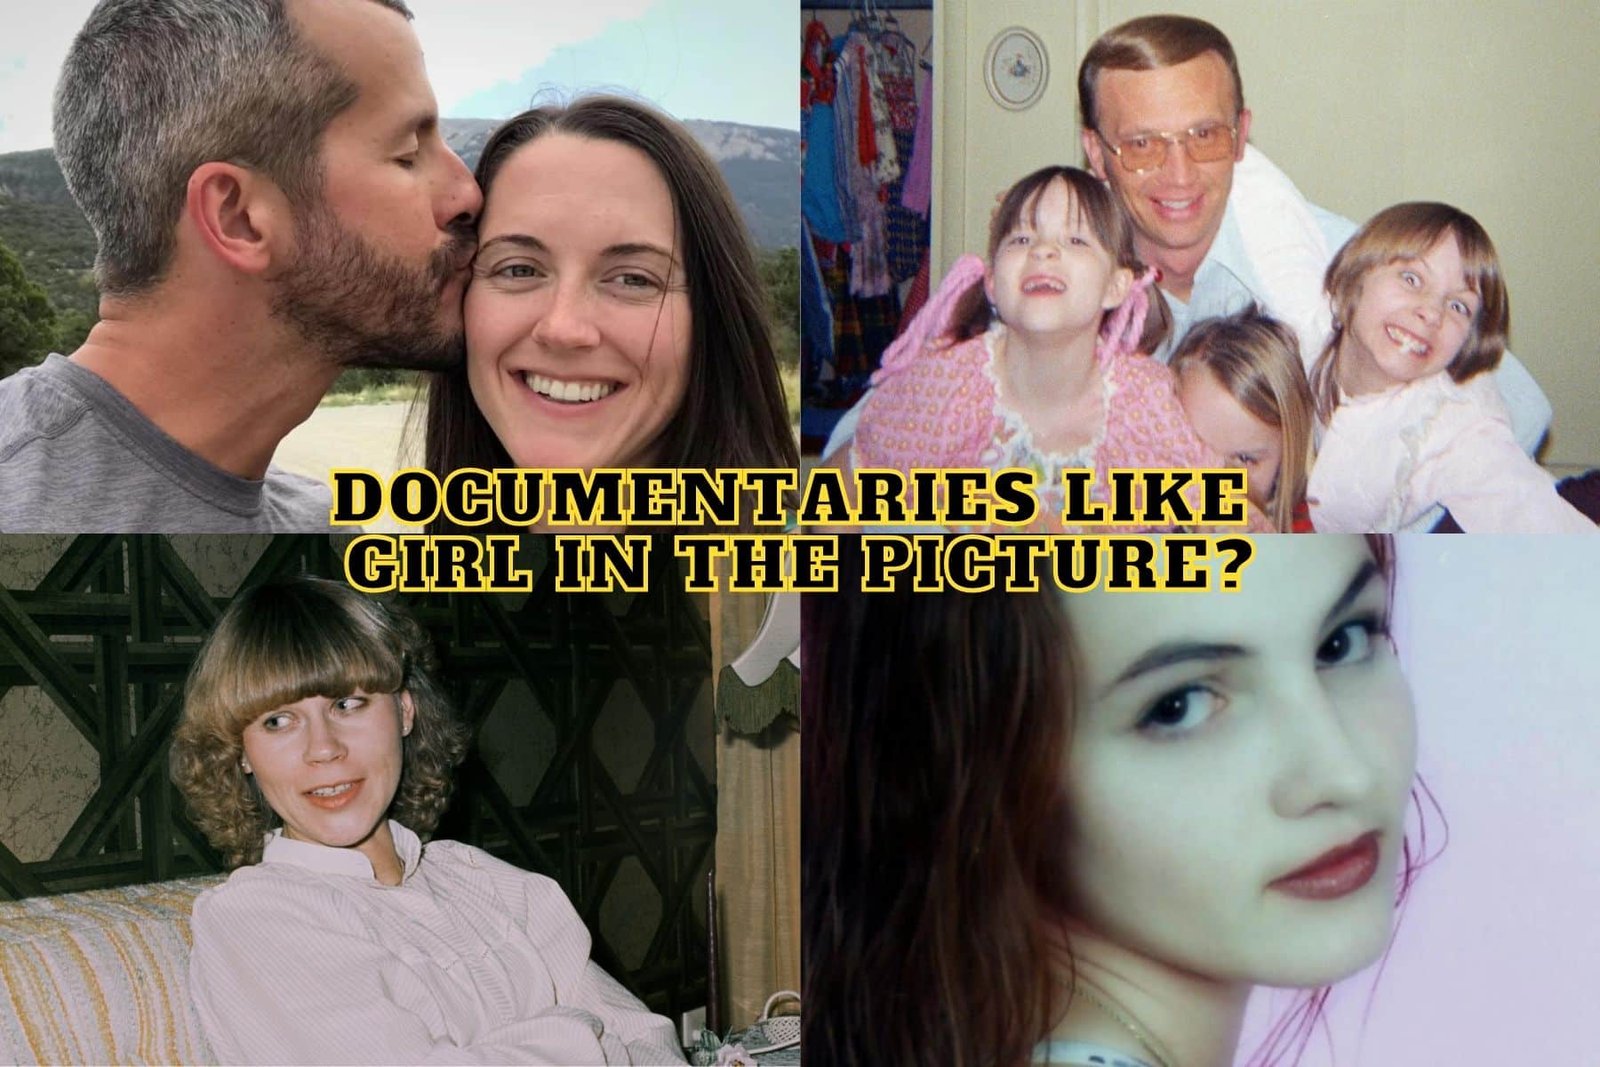 Documentaries like Girl in the Picture